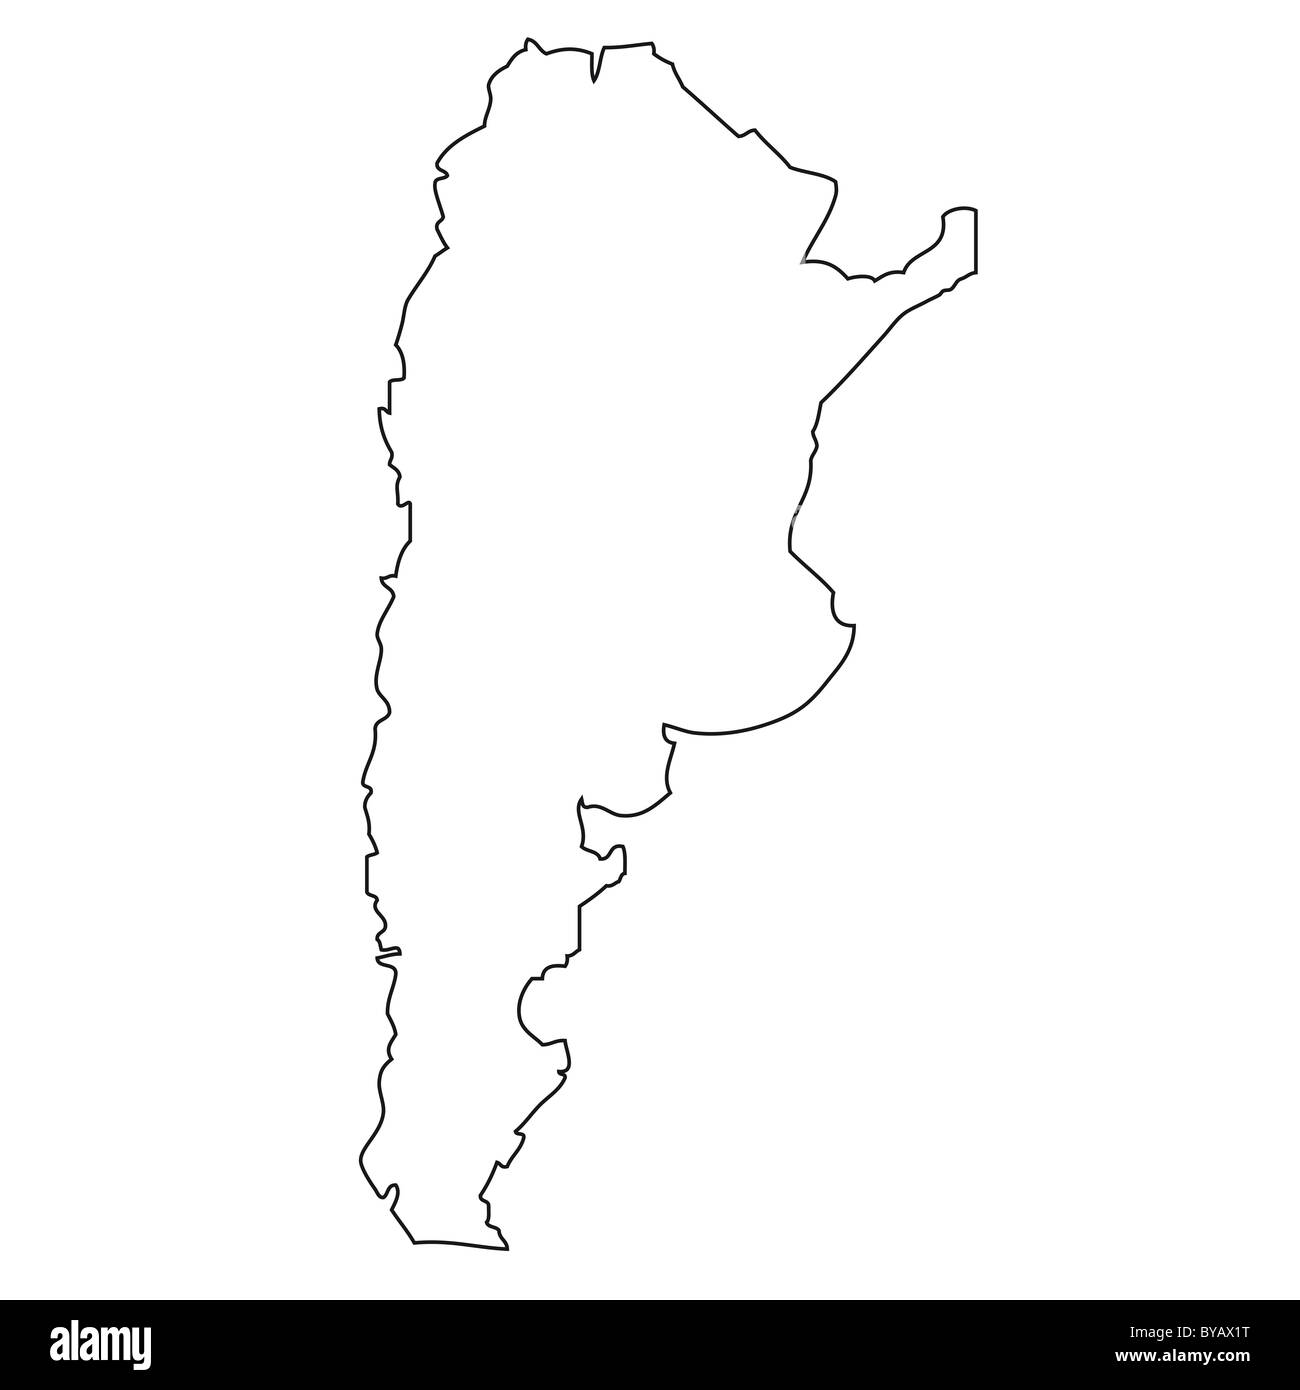 Outline, map of Argentina Stock Photo